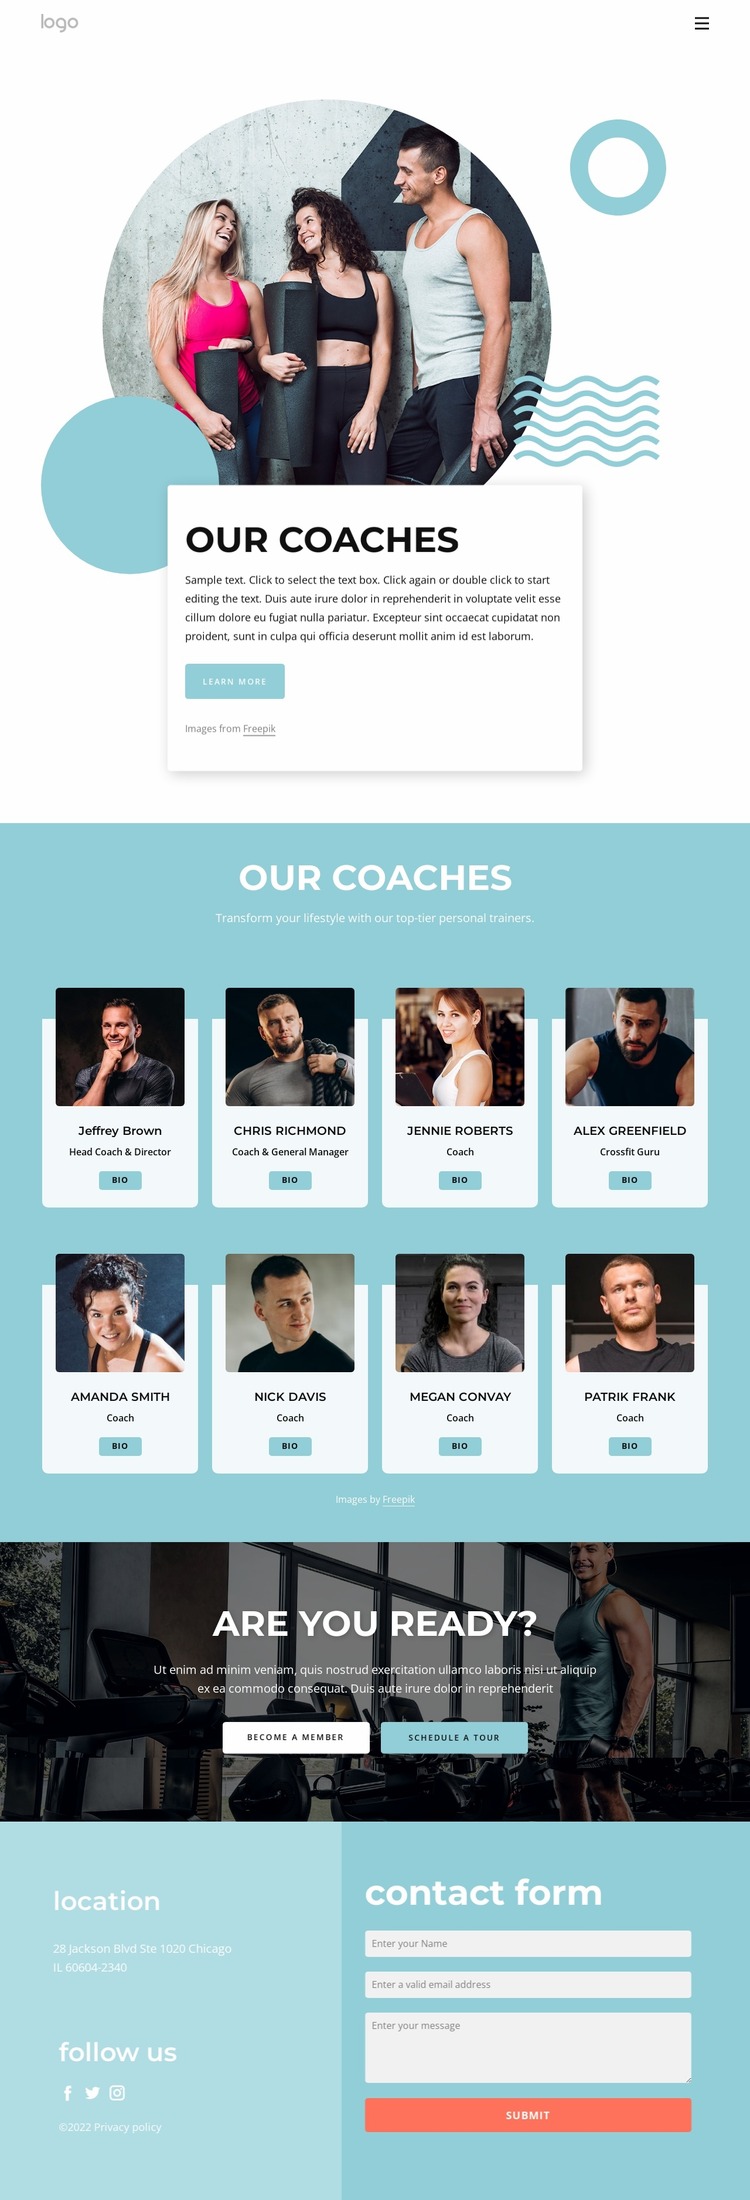 Our Coaches Html Website Builder